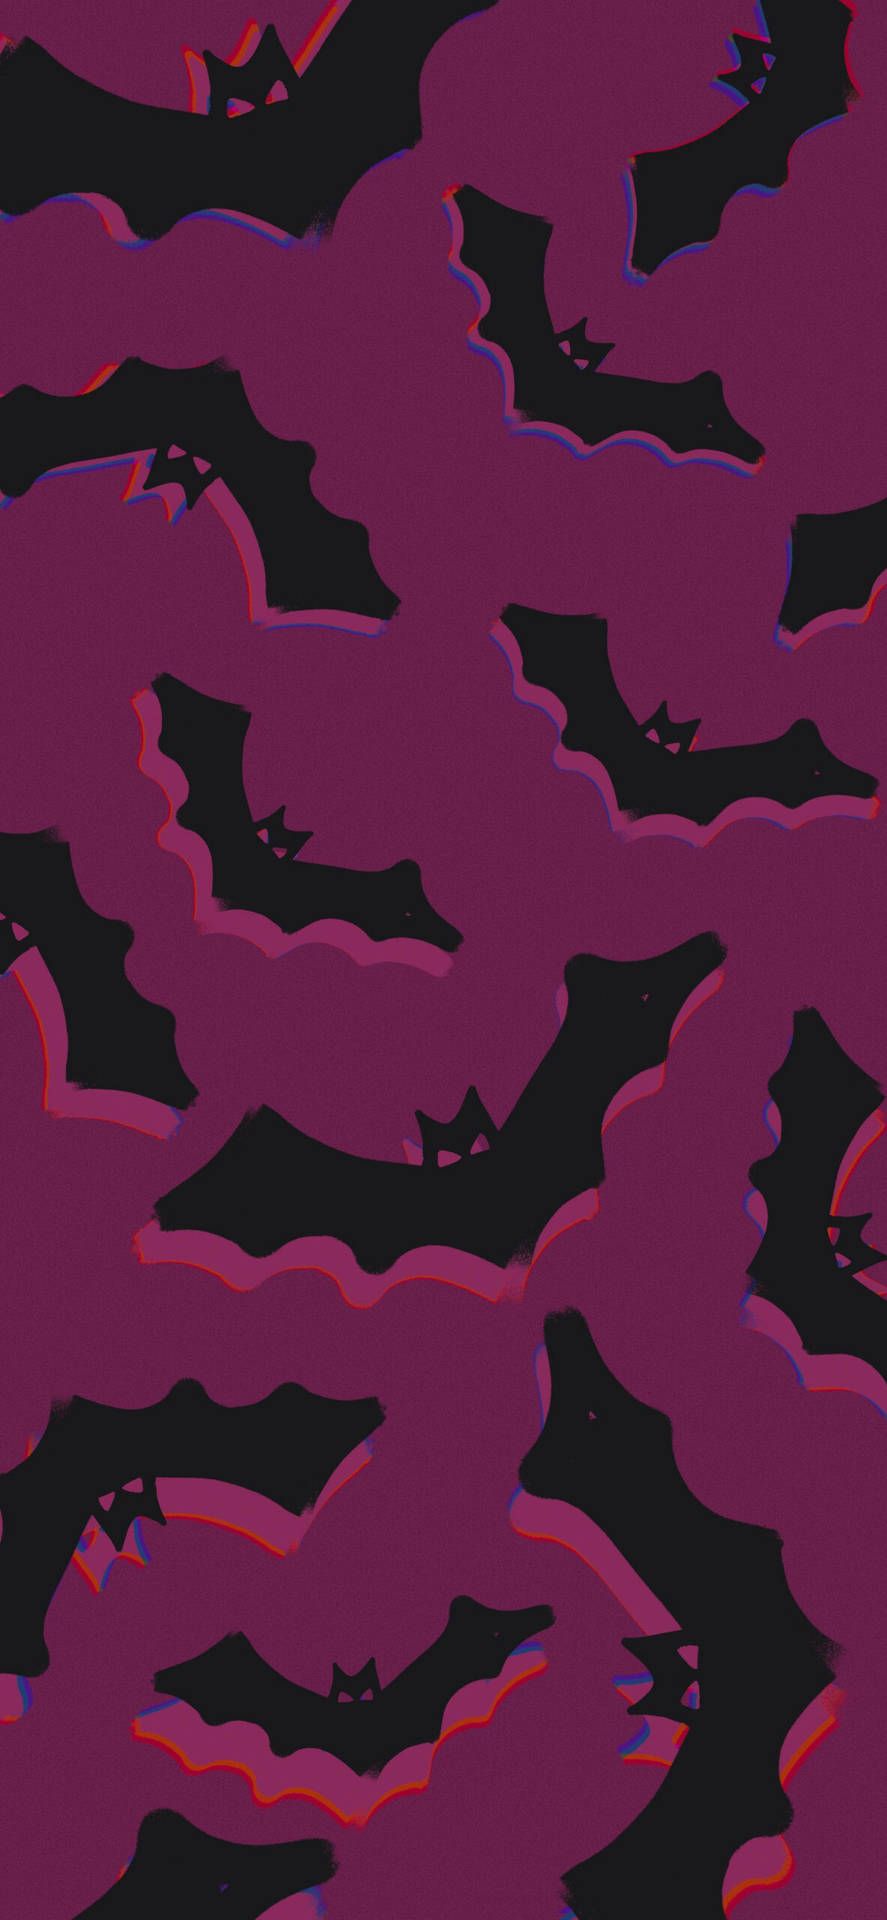 Step over the threshold and enter a mysterious, spooky world Wallpaper